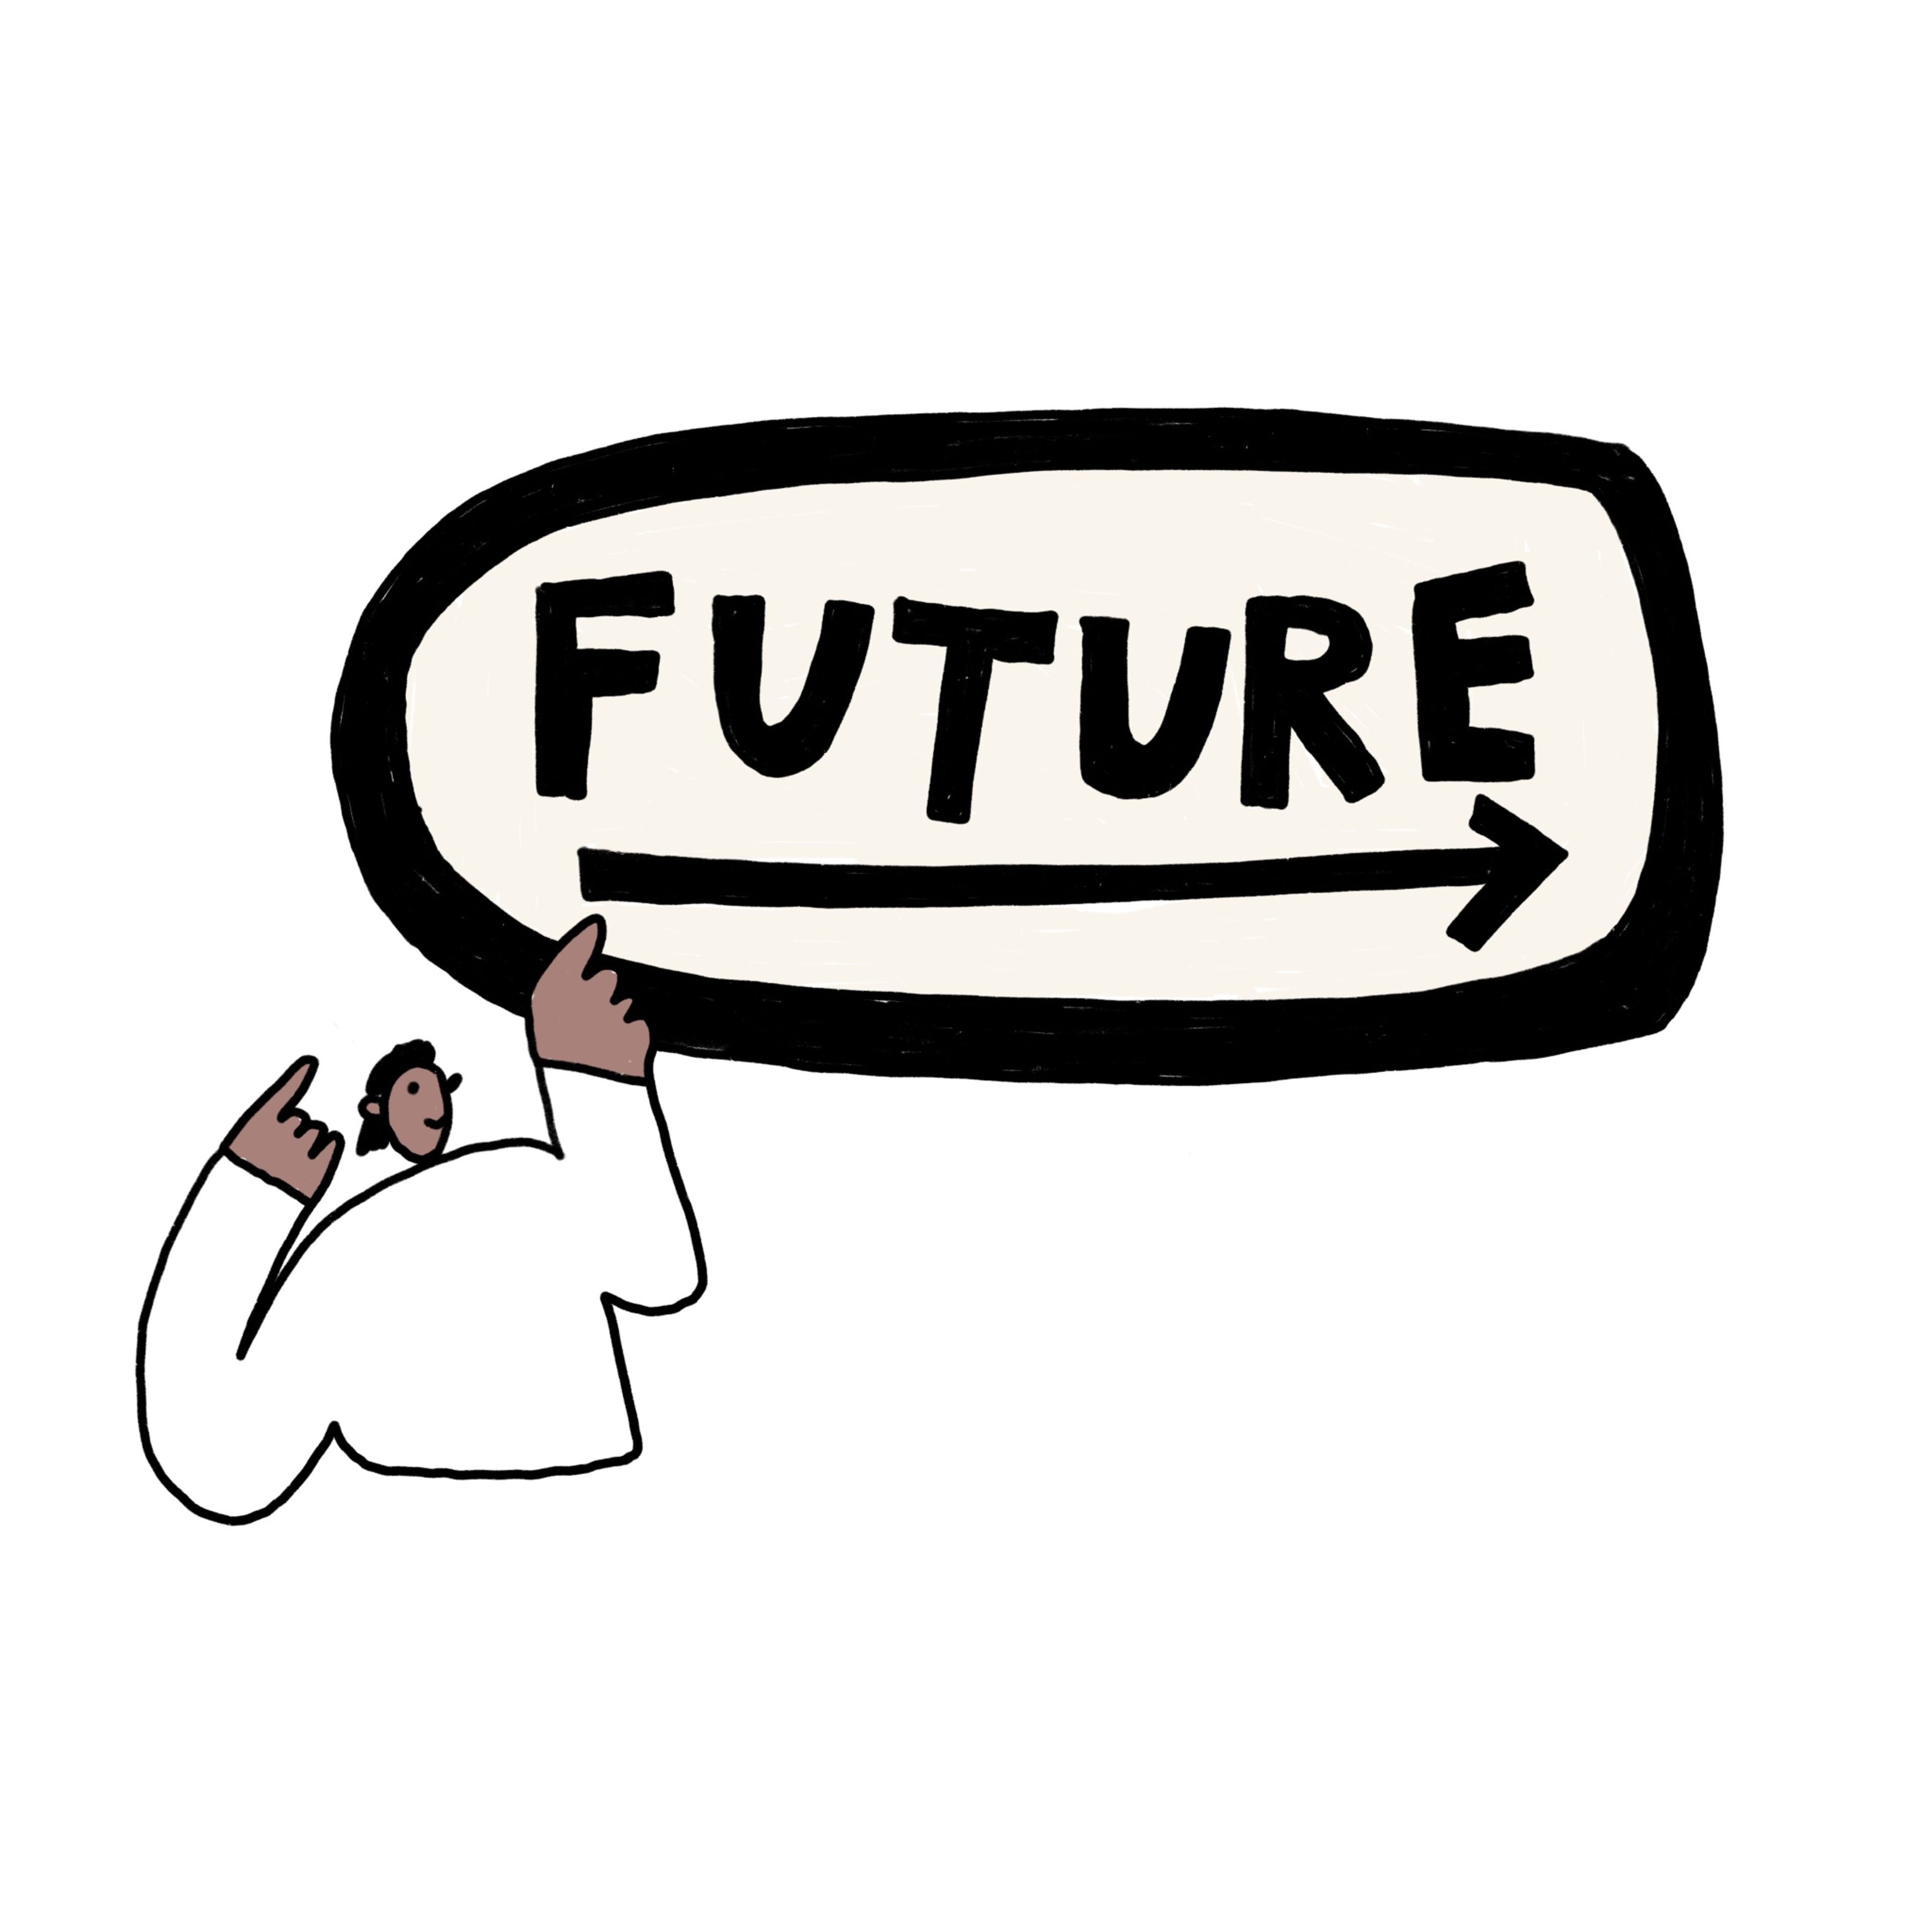 Illustration of a person pointing to the future